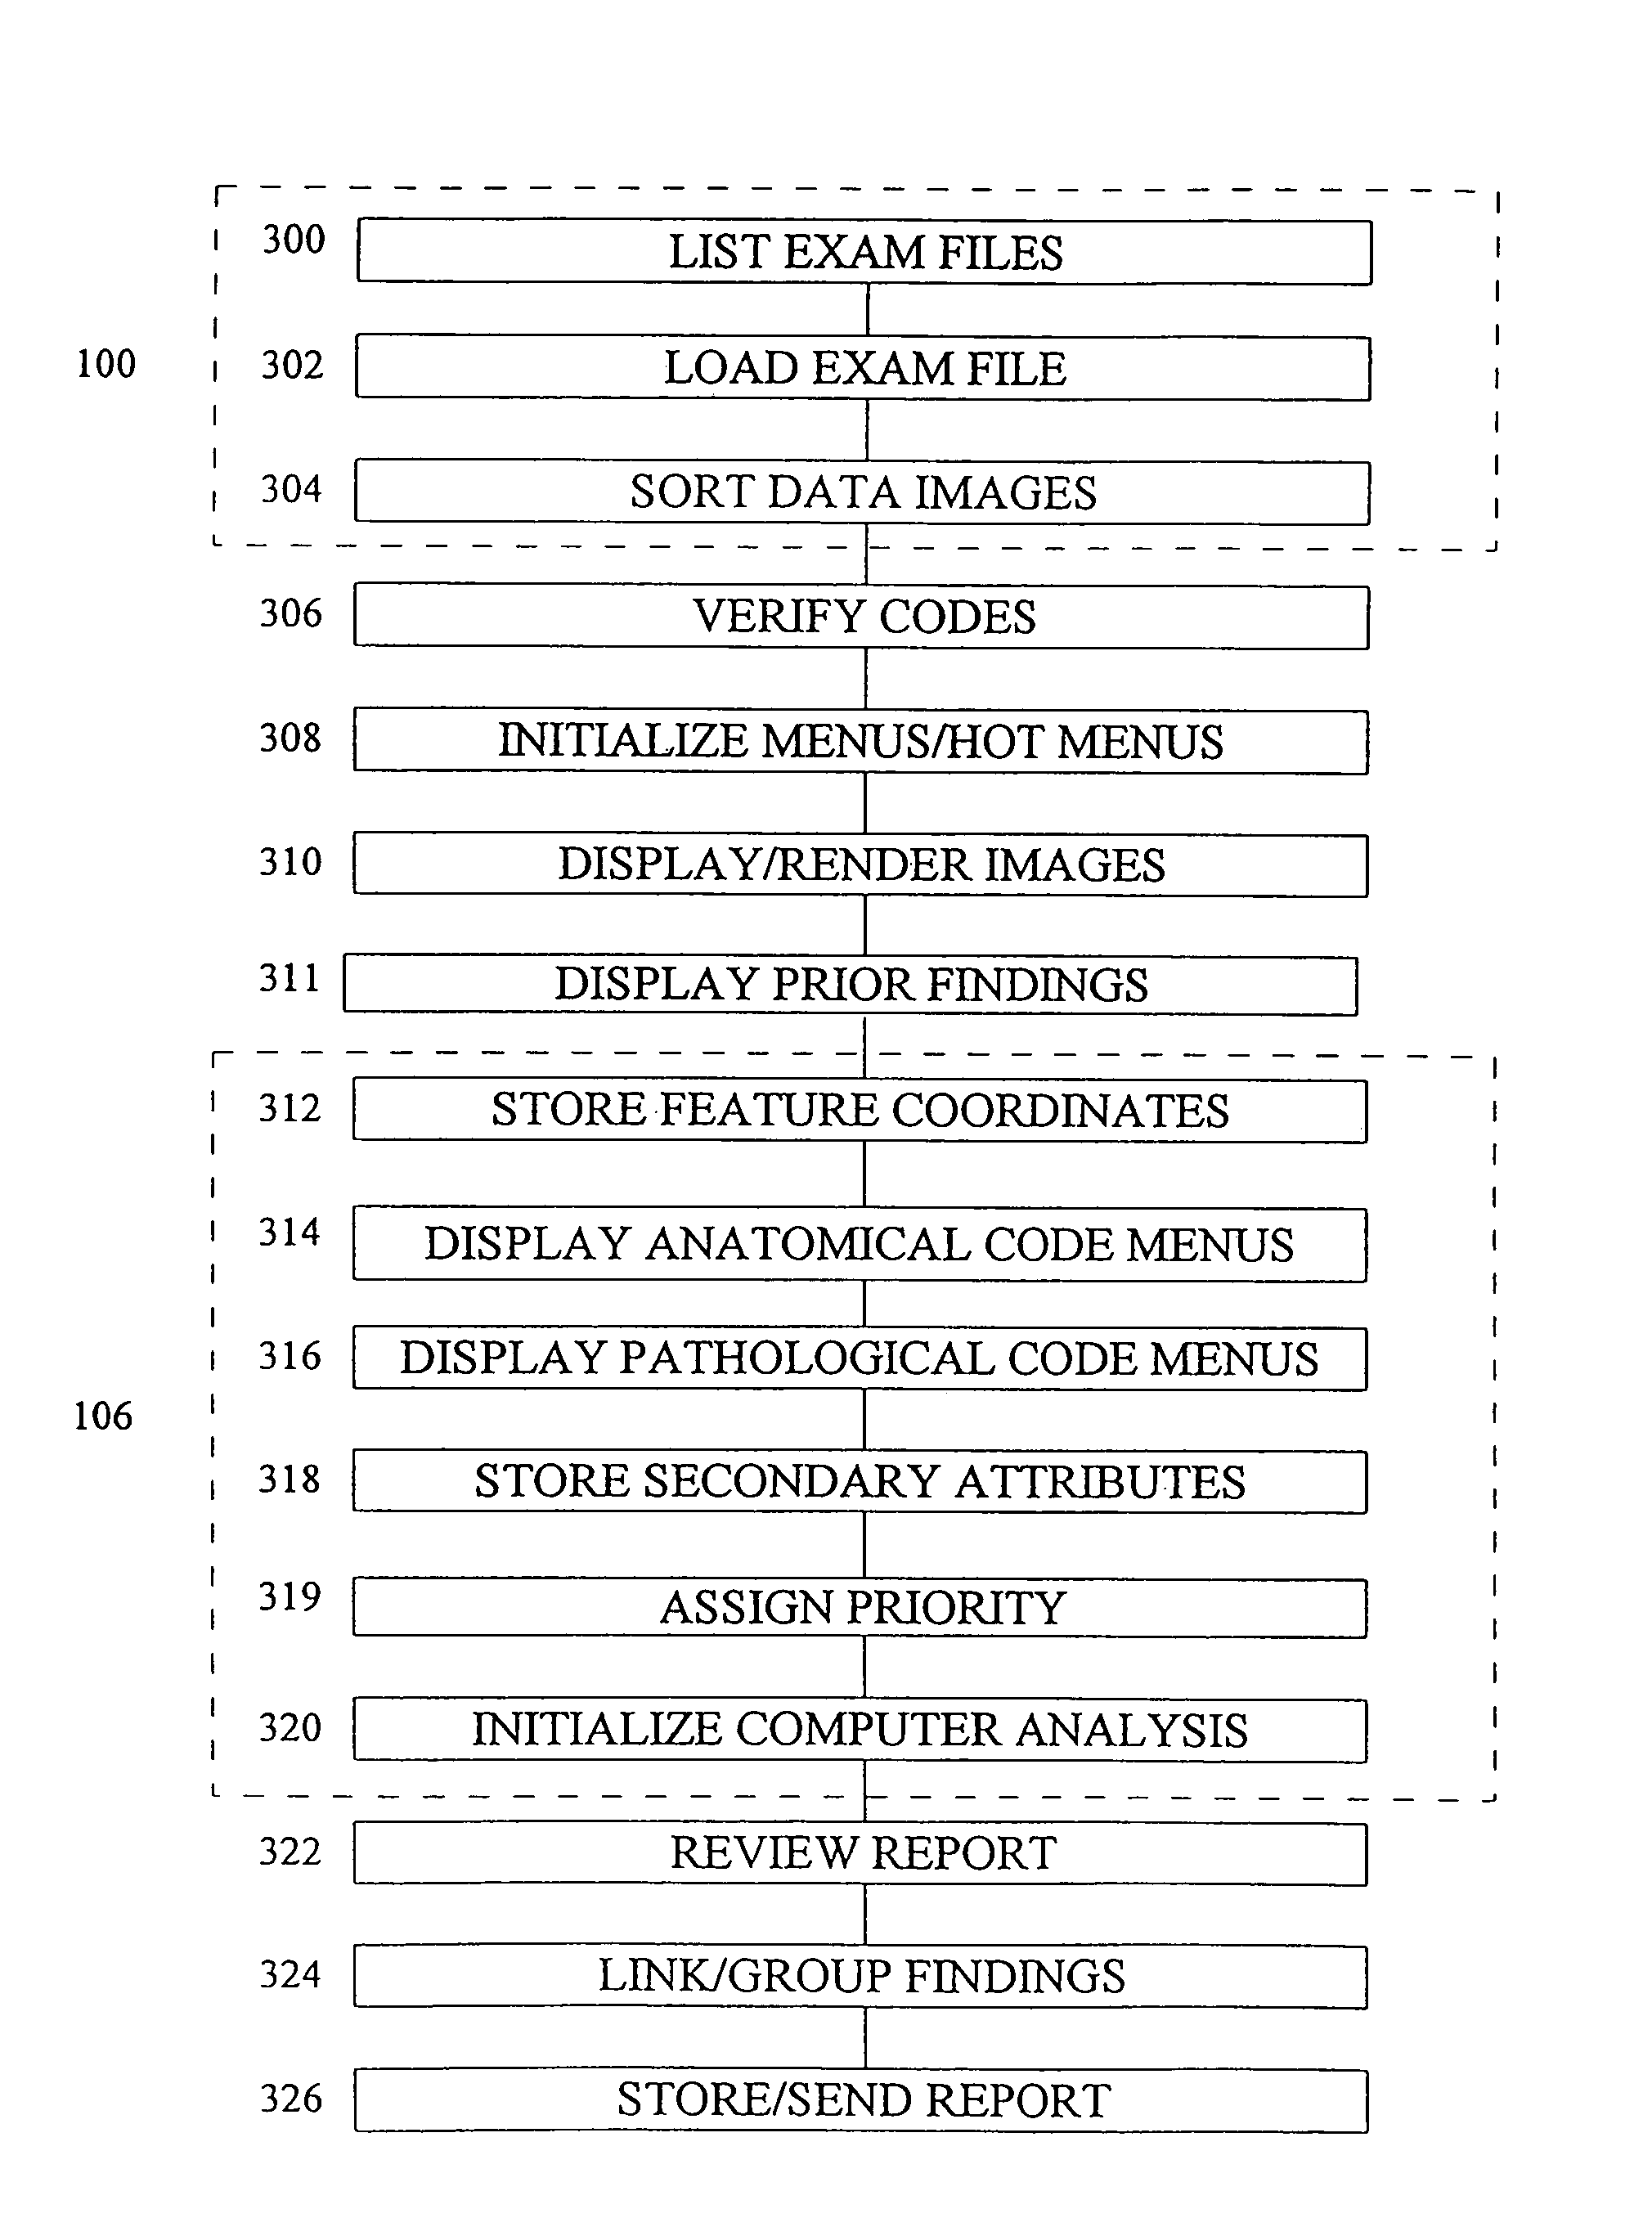 Image reporting method and system